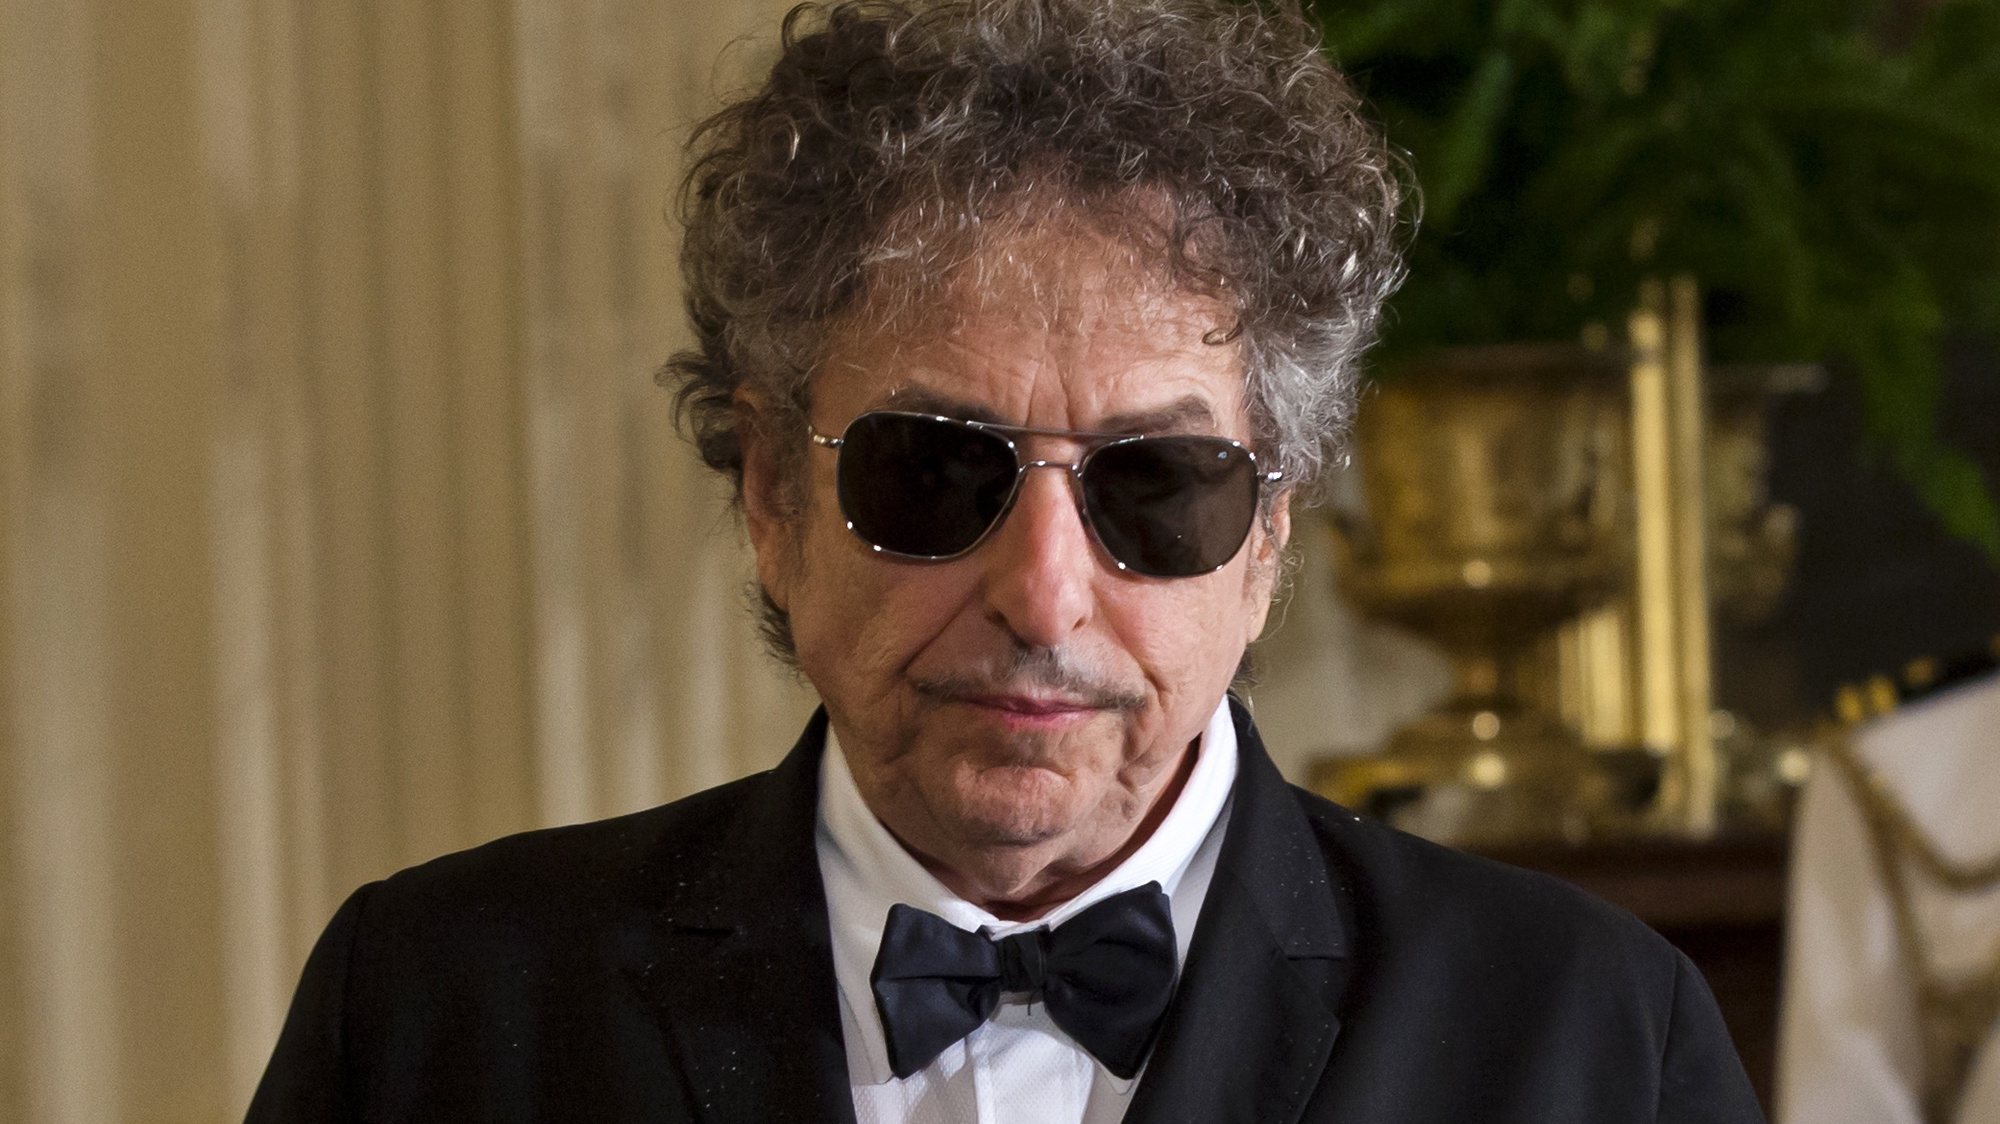 epa08868347 (FILE) - US folk music legend Bob Dylan in the East Room of the White House in Washington, DC USA, 29 May 2012 (reissued 07 December 2020). Universal Music announced it has signed a deal to purchase Bob Dylan&#039;s entire catalogue.  EPA/JIM LO SCALZO *** Local Caption *** 53121570